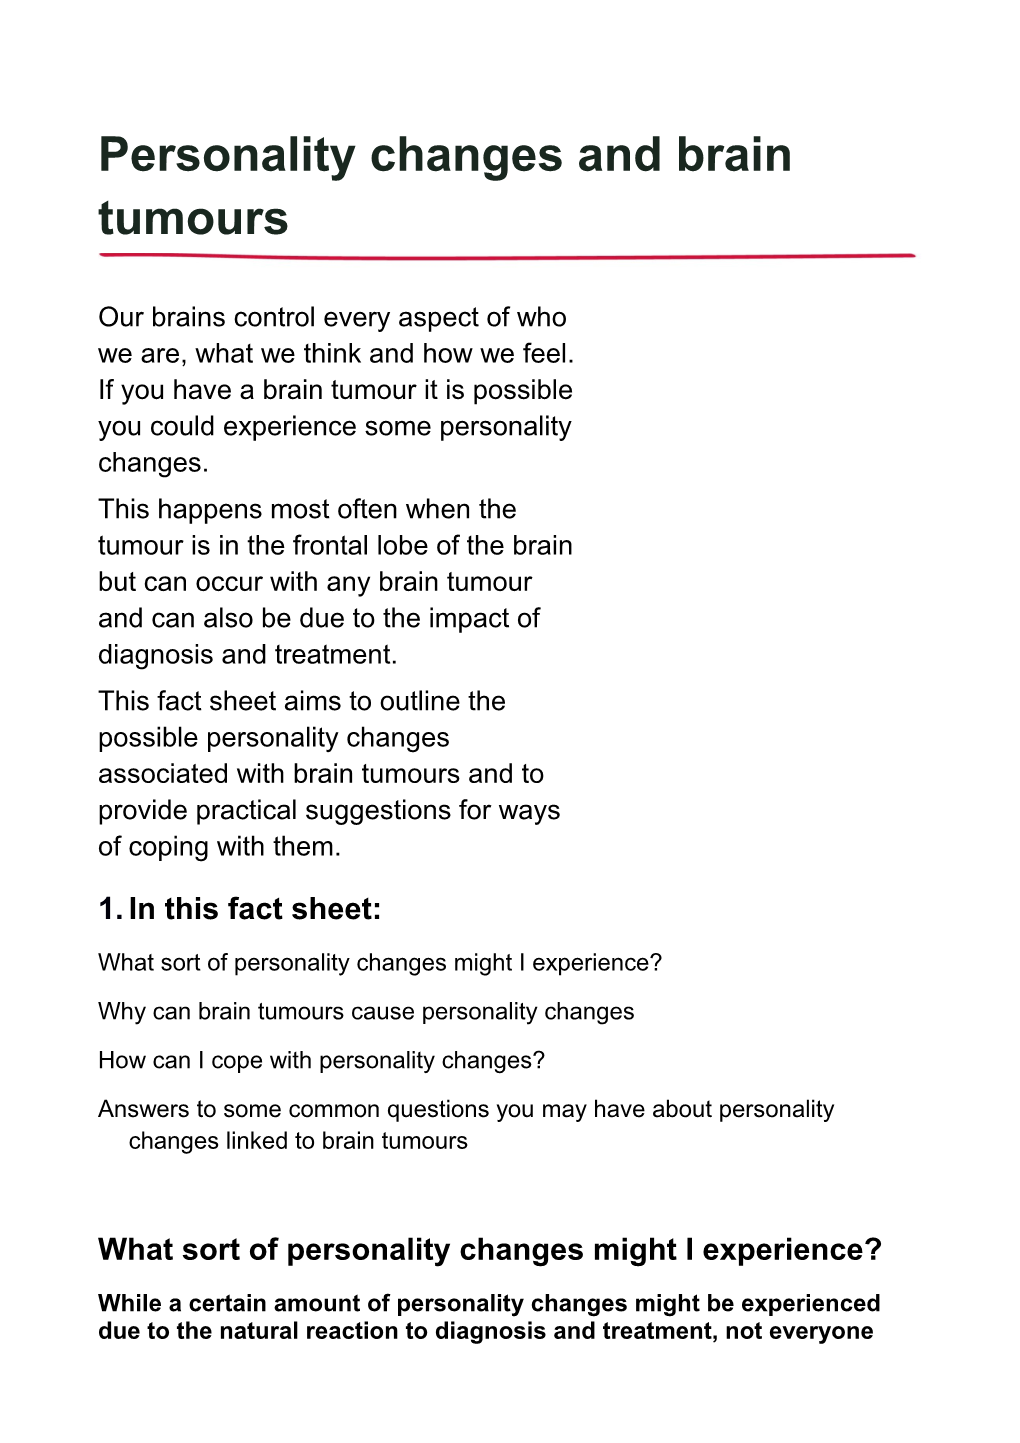 Personality Changes and Brain Tumours